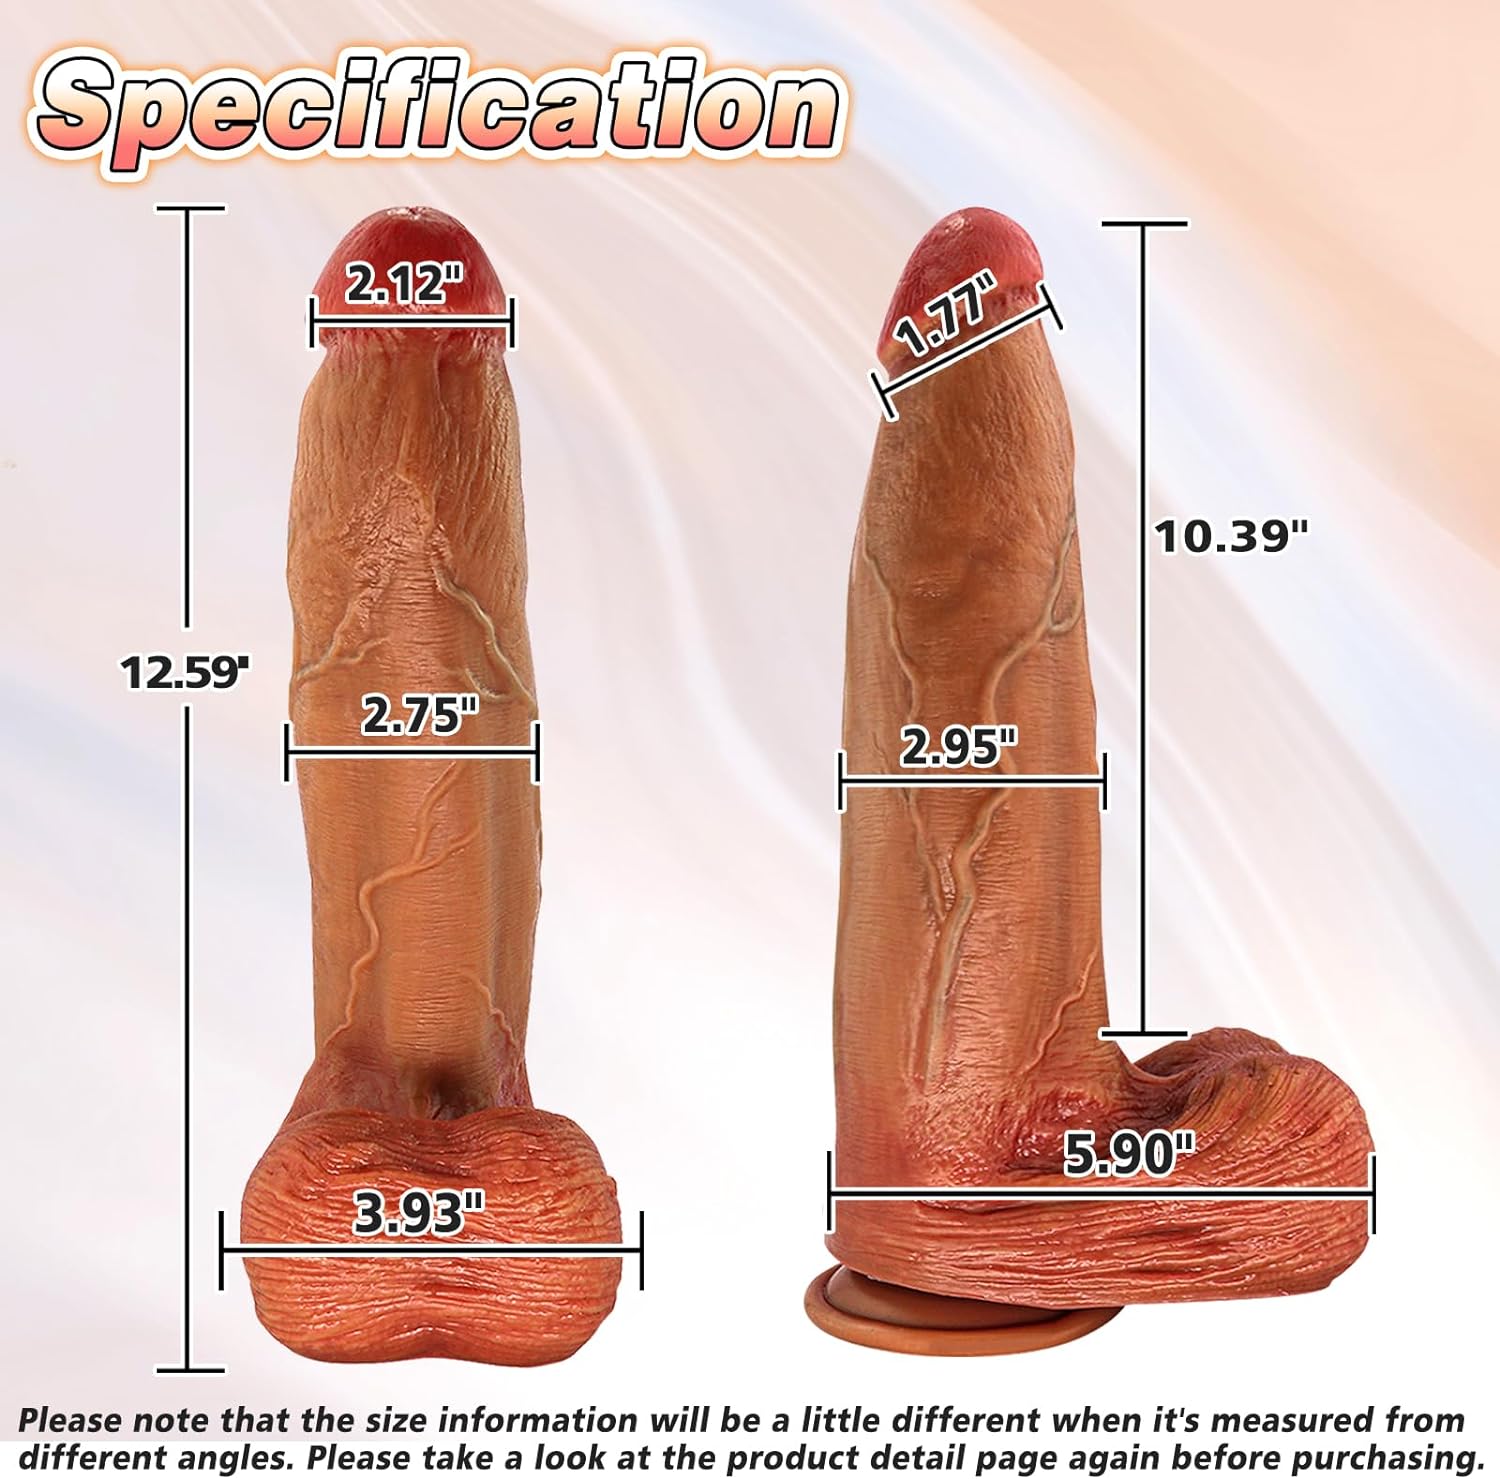 TaRiss's Silicone Realistic Dildo for Man Women Couple Brown 12.59 Inch - tarisss.com